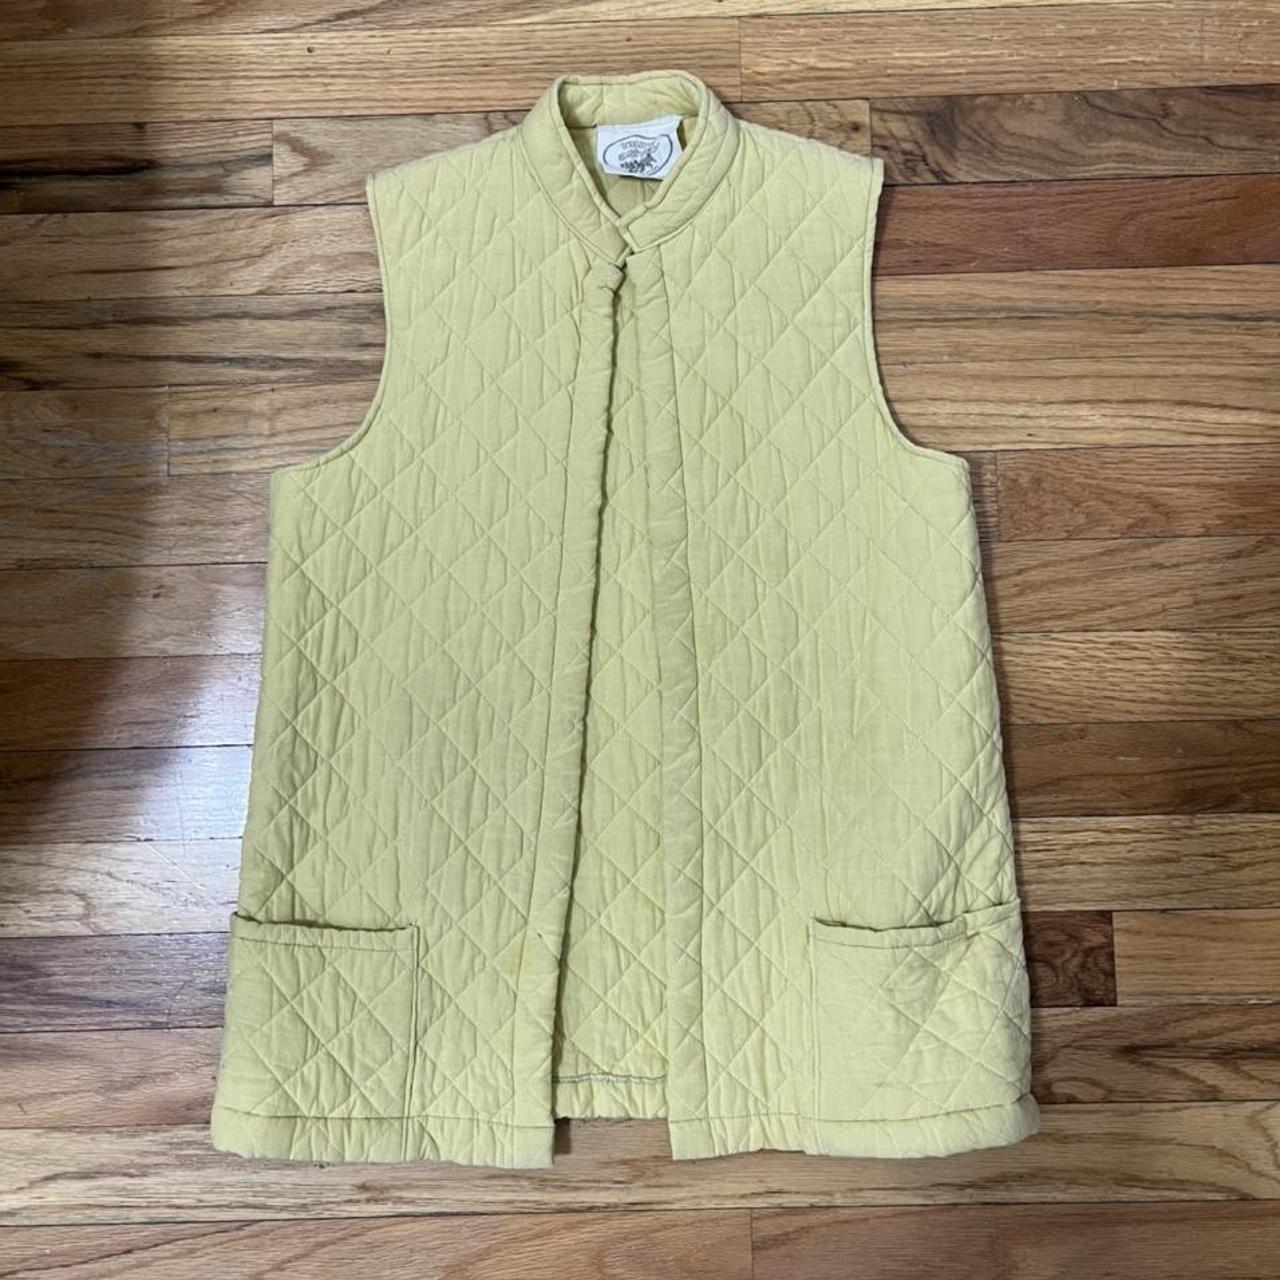 Vintage quilted pale yellow vest with blue... - Depop